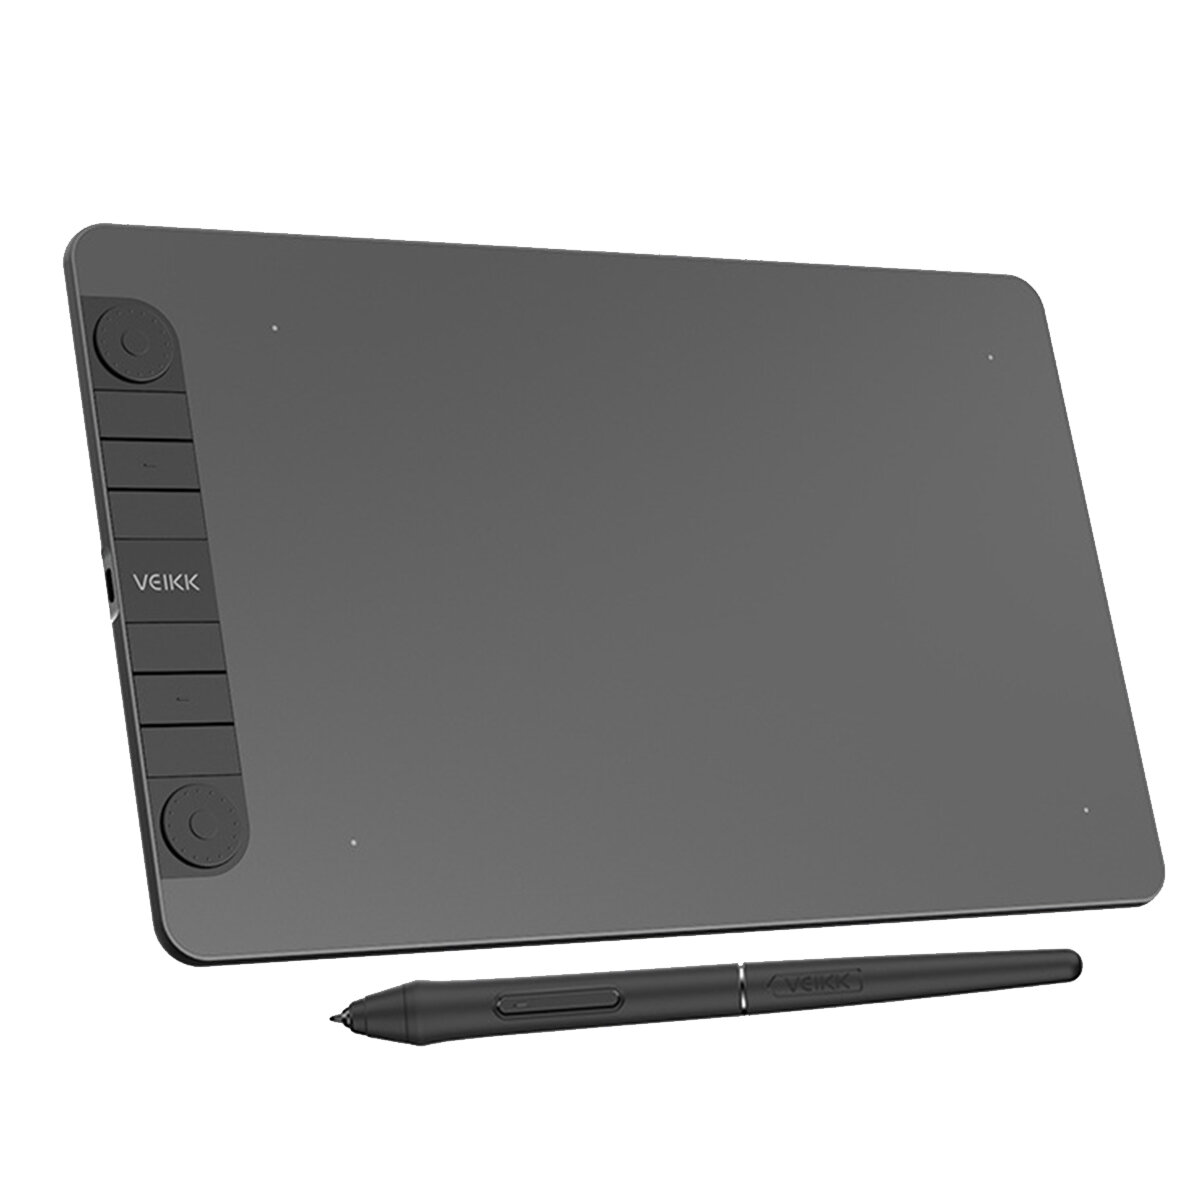 Image of VEIKK VK1060PRO 10x6 inch Drawing Graphic Tablet with Battery-Free Digital Pen for Mac Android Windows